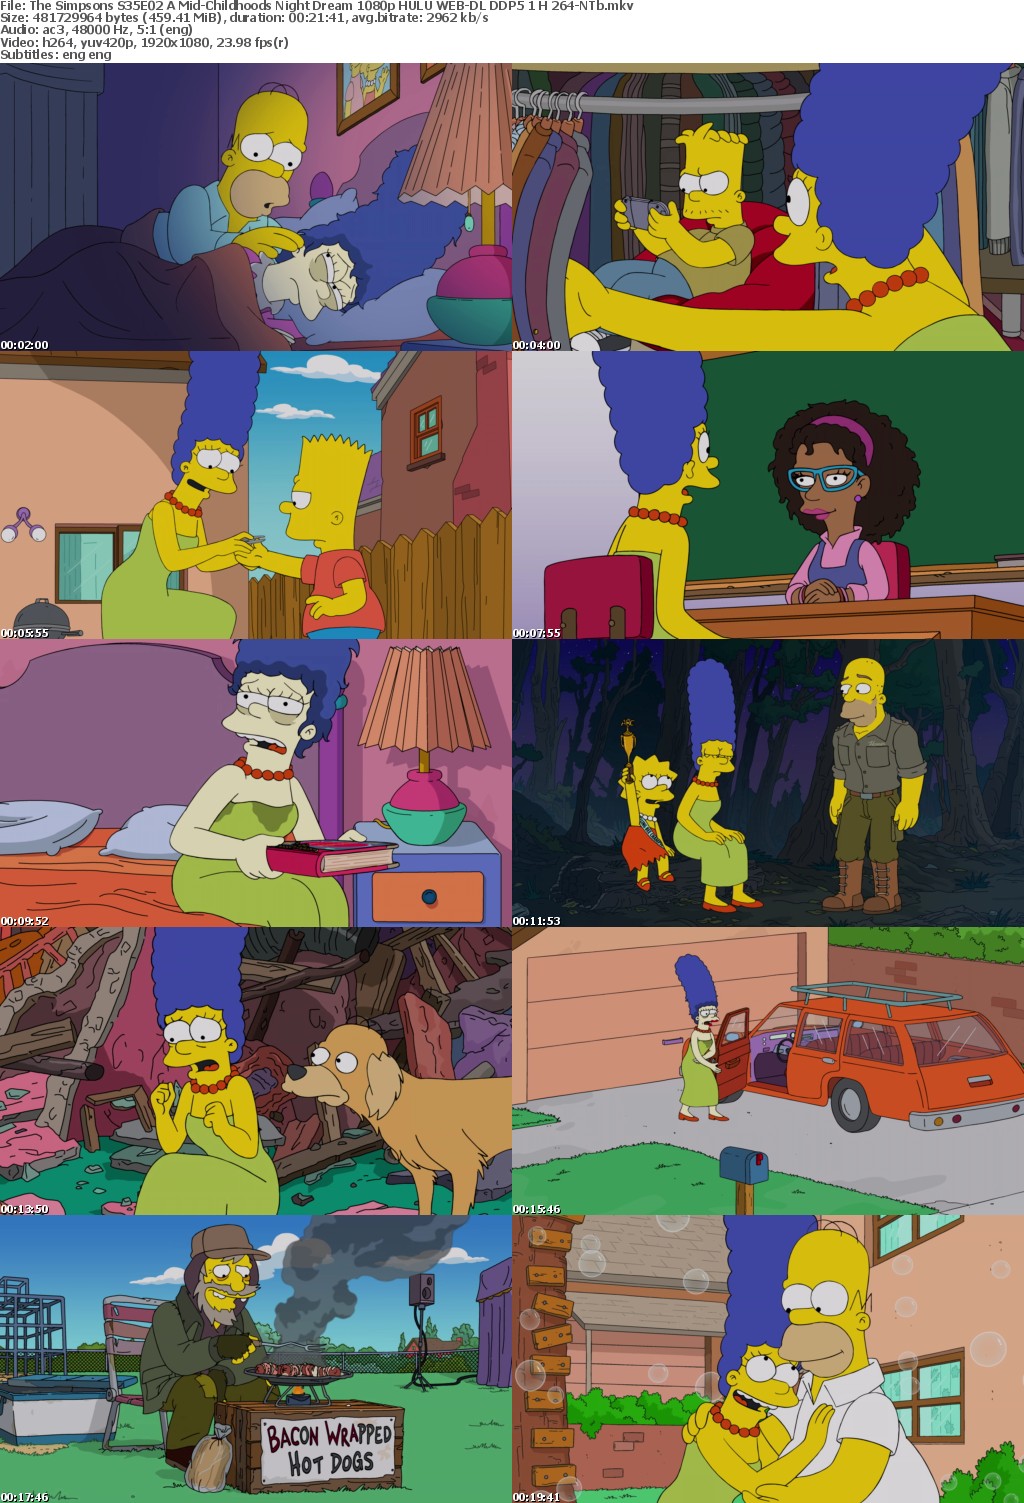 The Simpsons S35E02 A Mid-Childhoods Night Dream 1080p HULU WEB-DL DDP5 1 H 264-NTb